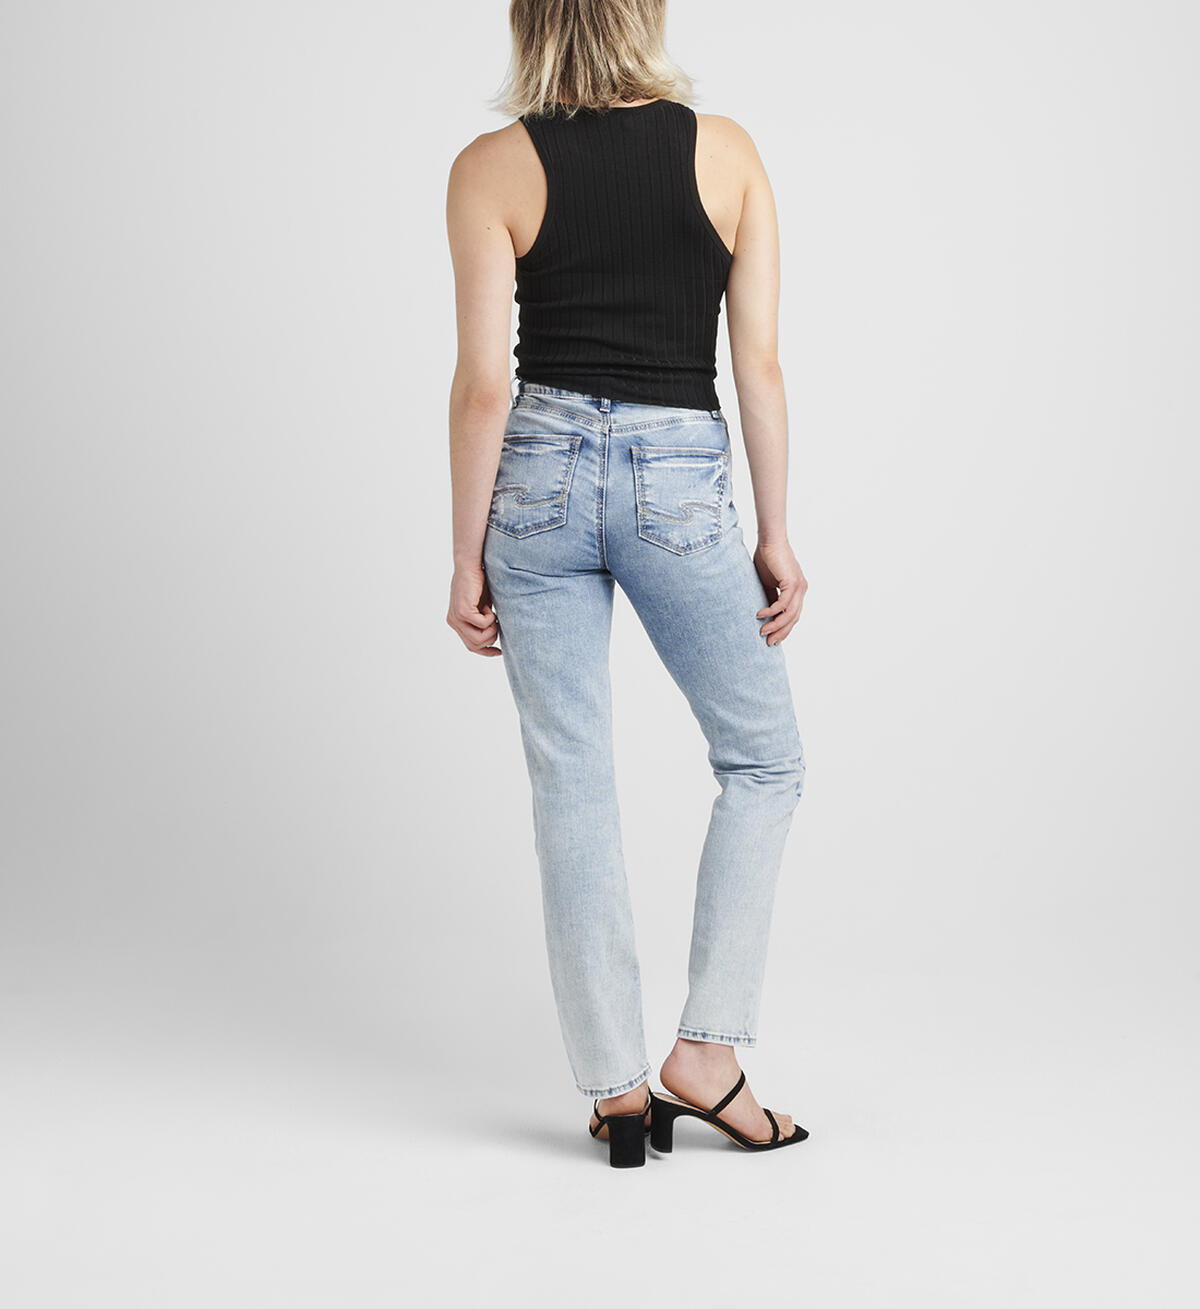 Avery High Rise Straight Leg Jeans, , hi-res image number 1